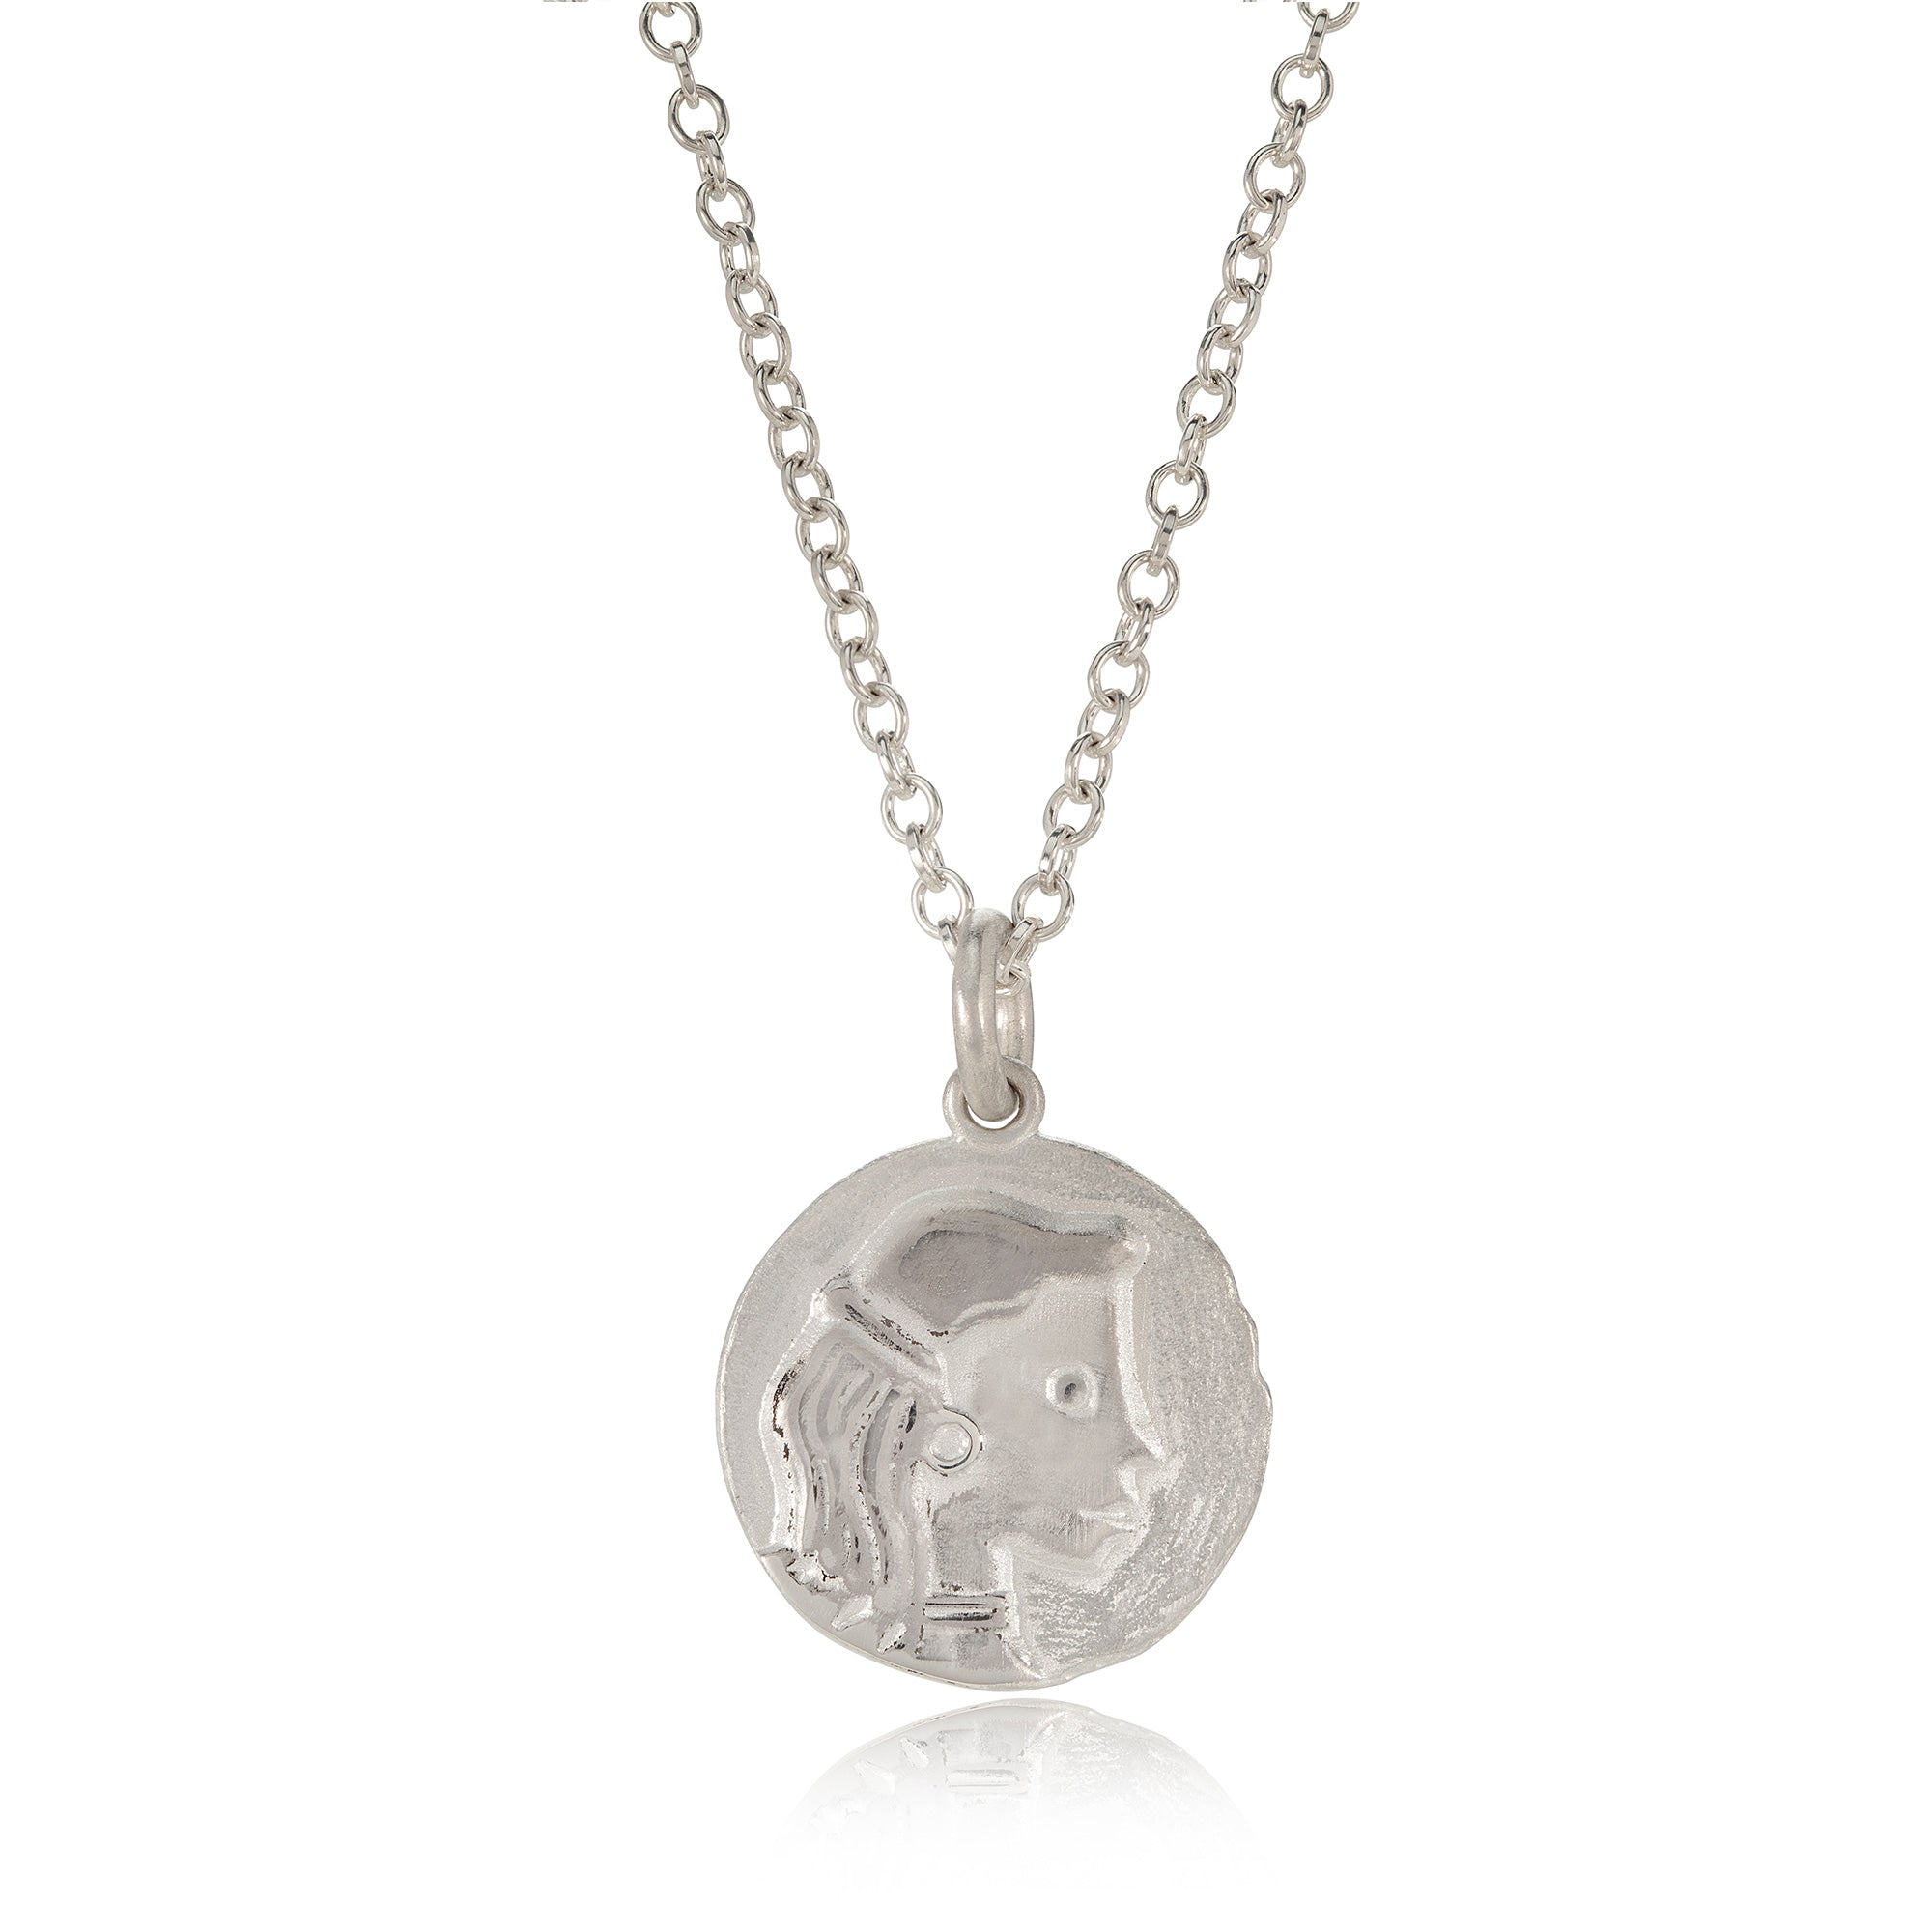 Silver virgo pendant pictured on white background